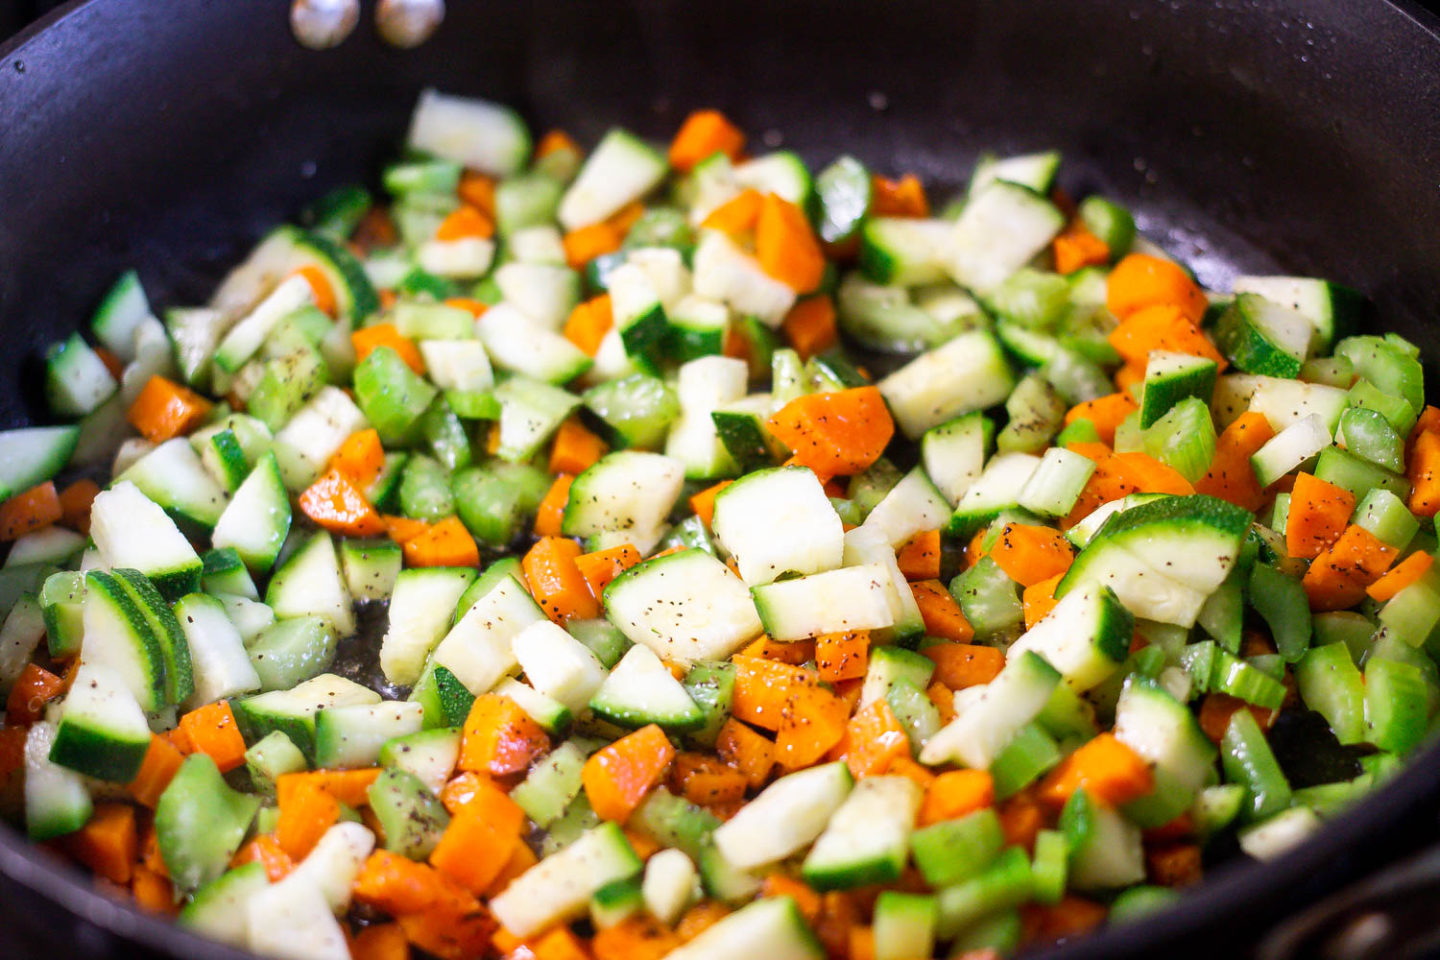 A saute pan filled with diced carrots, celery, zucchini